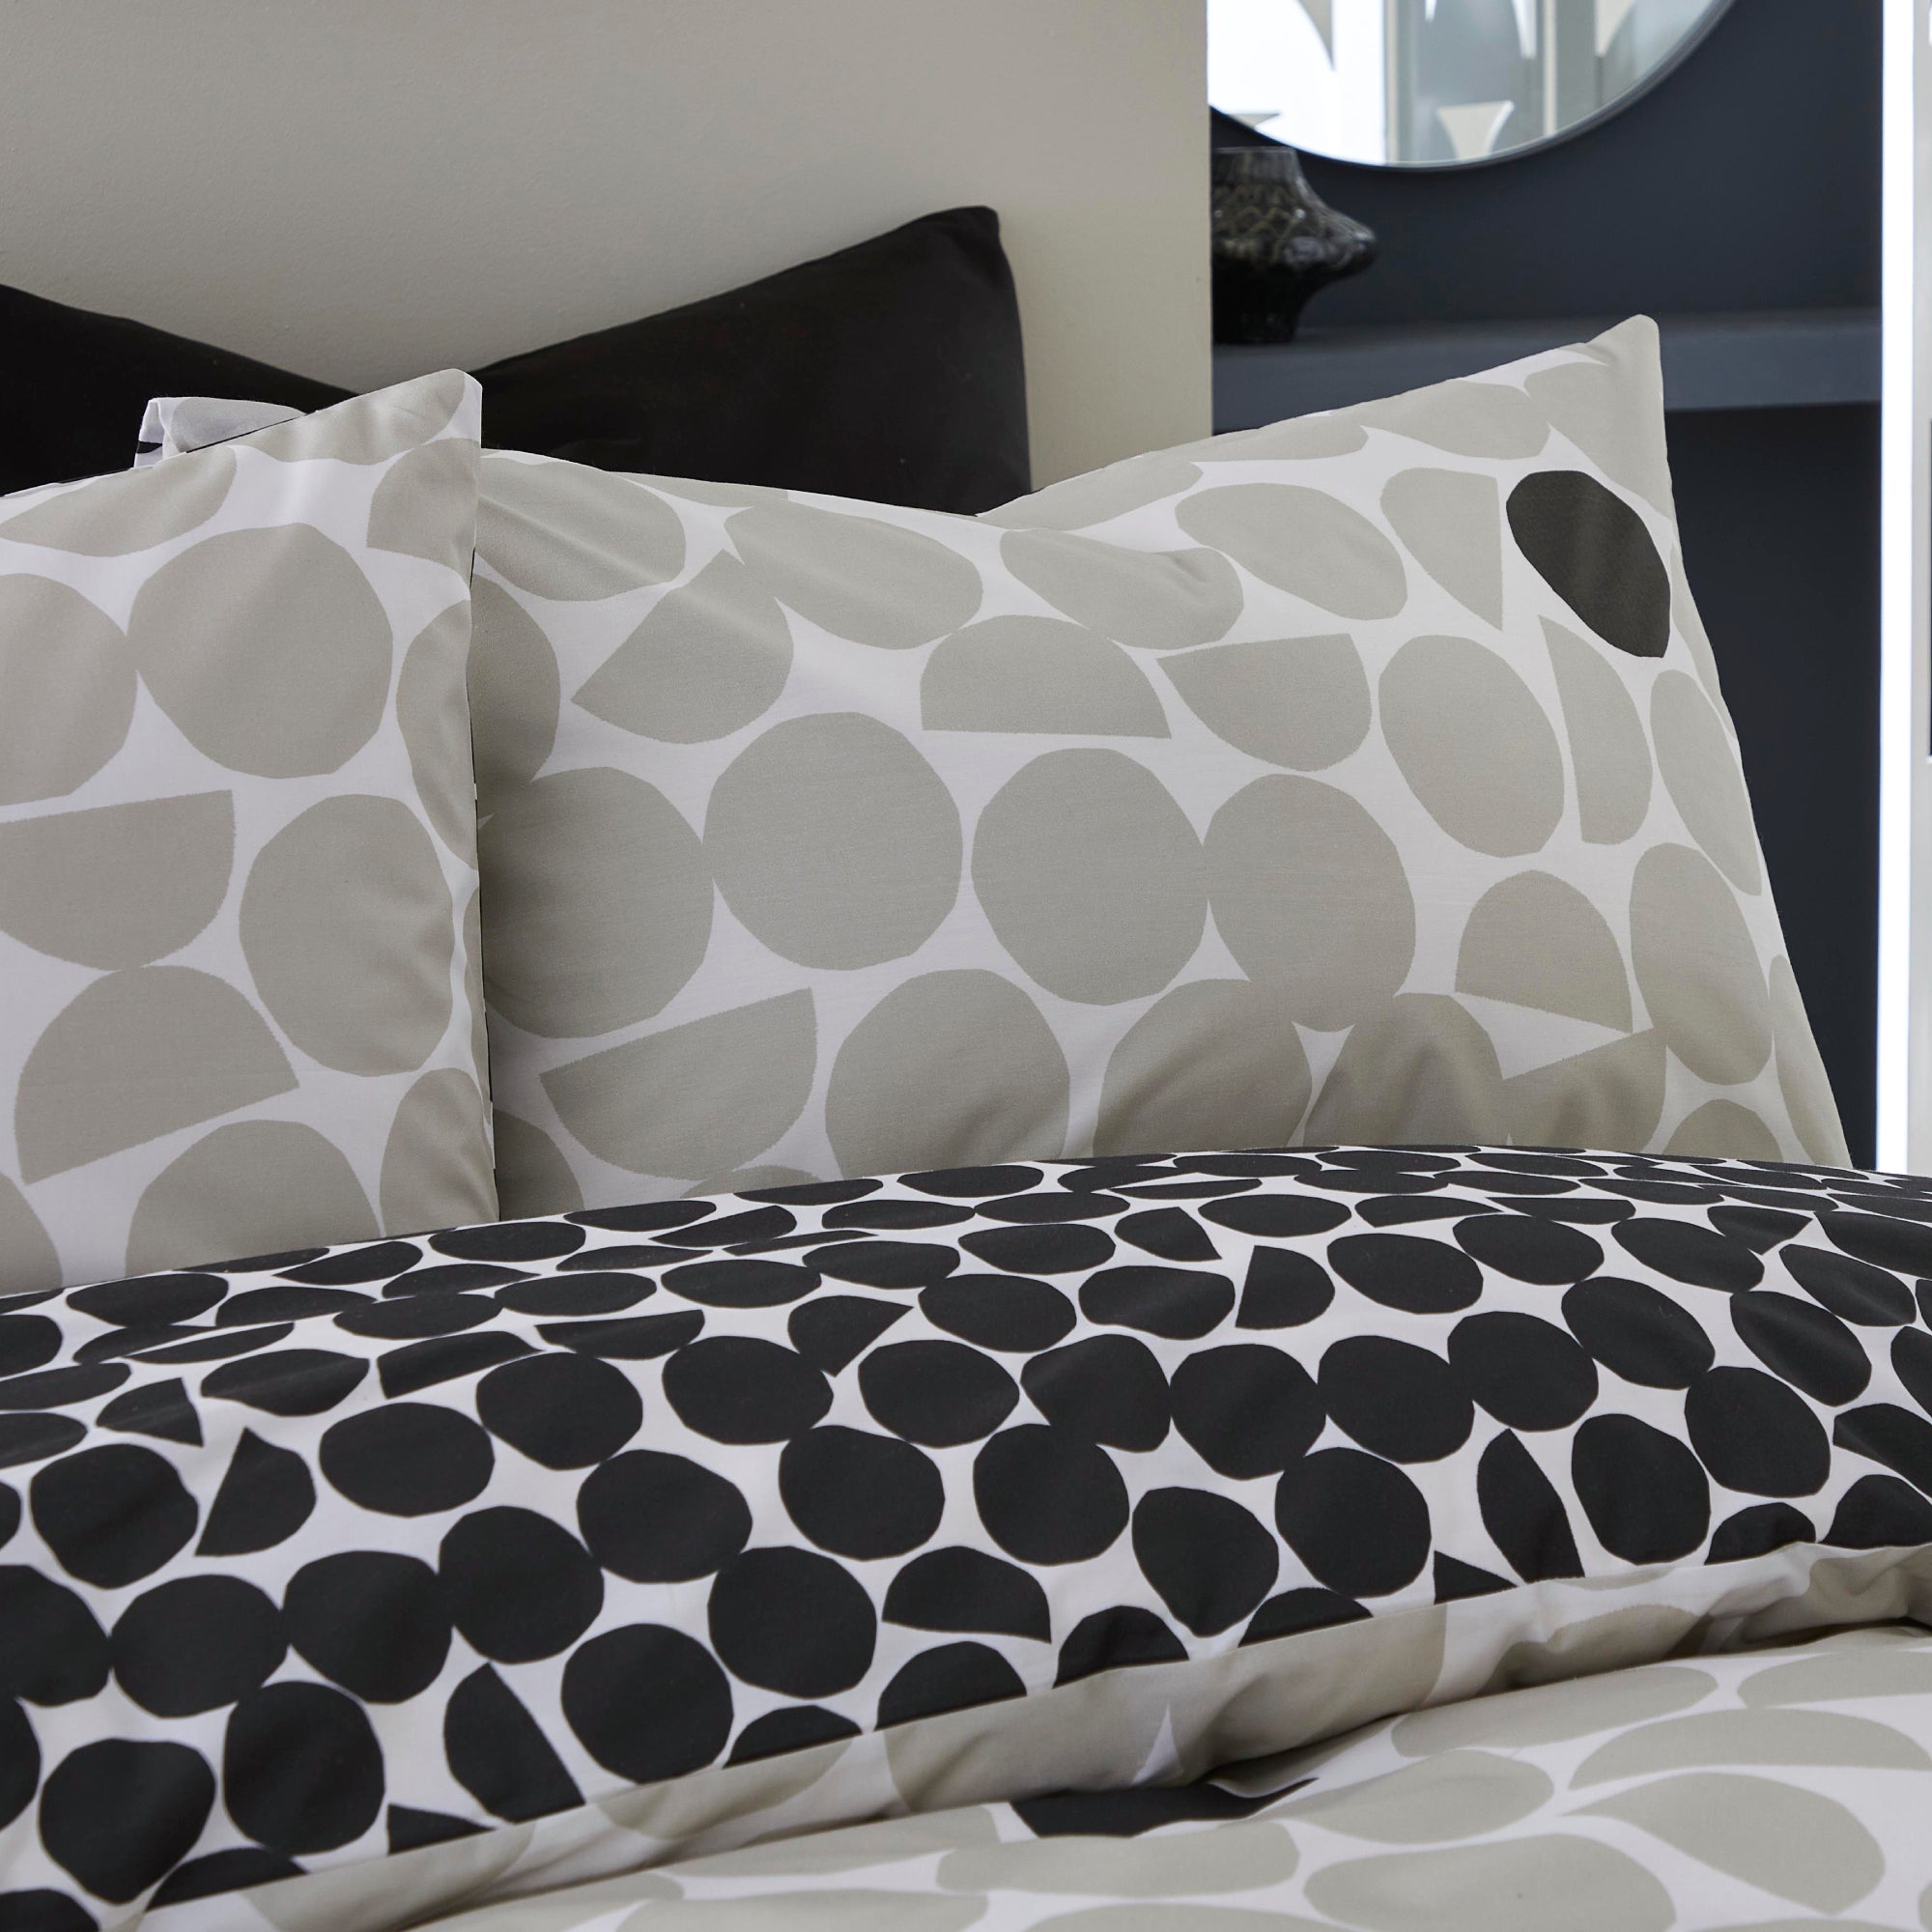 Duvet Cover Set Ingo by Fusion in Natural